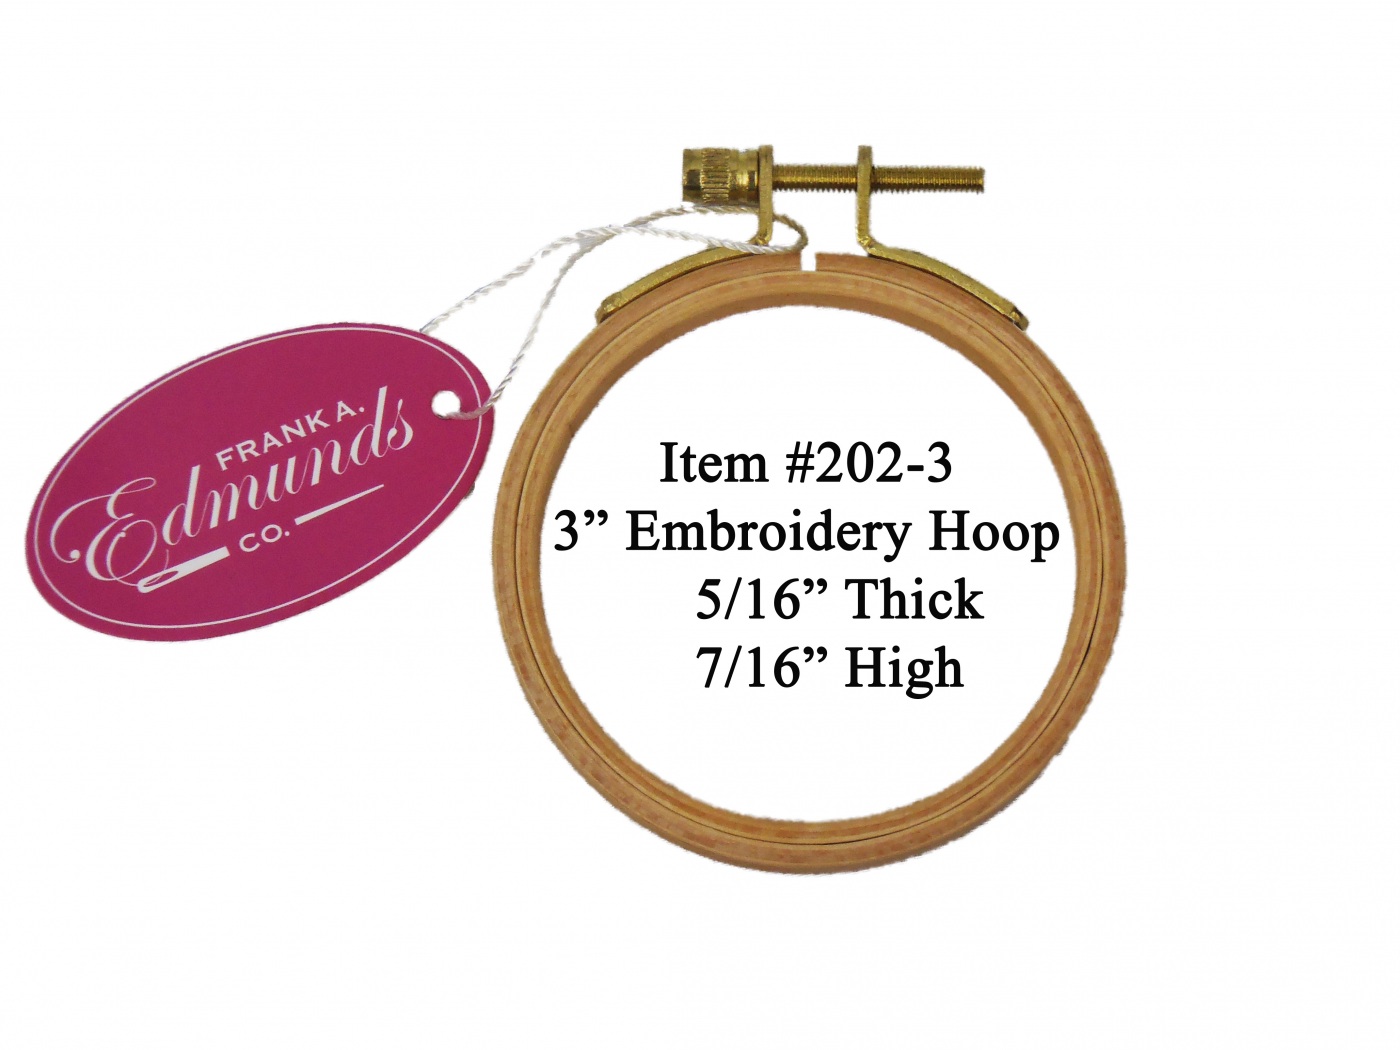 6 x 6 Square Embroidery Hoop - Needlework Projects, Tools & Accessories